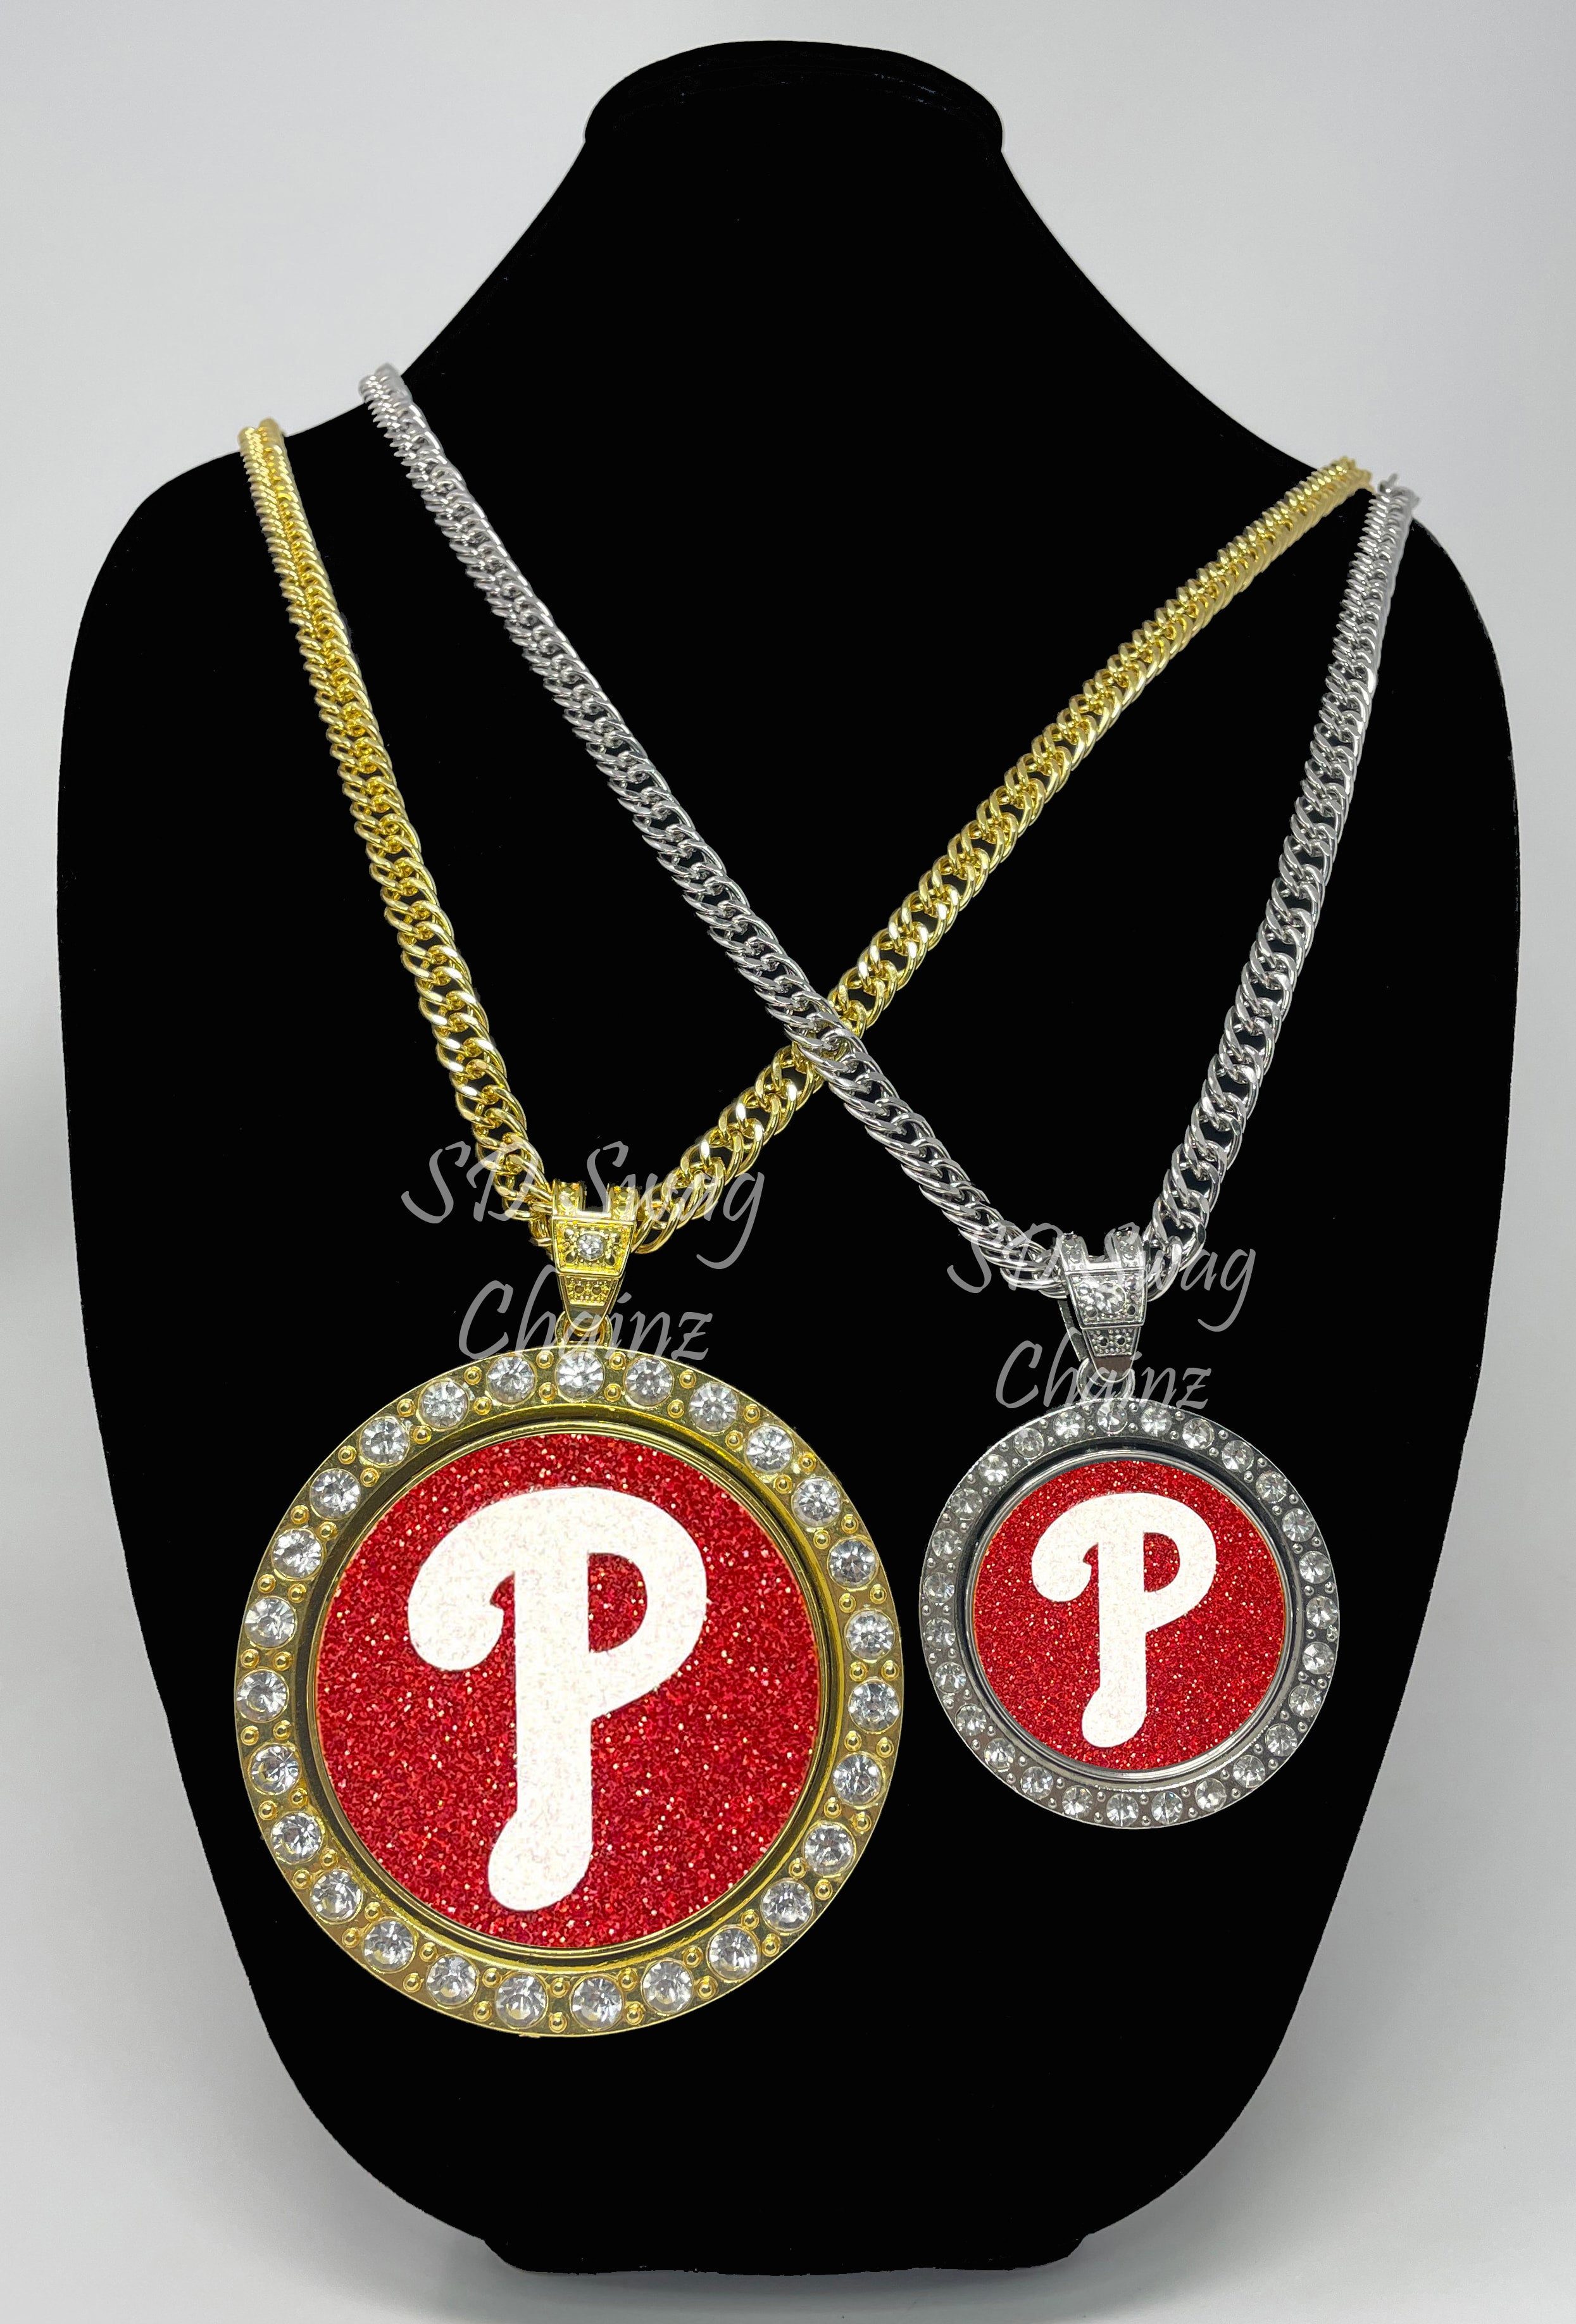 Large Philadelphia Phillies Stainless Steel Chain Link Pendant Necklace D5  | eBay